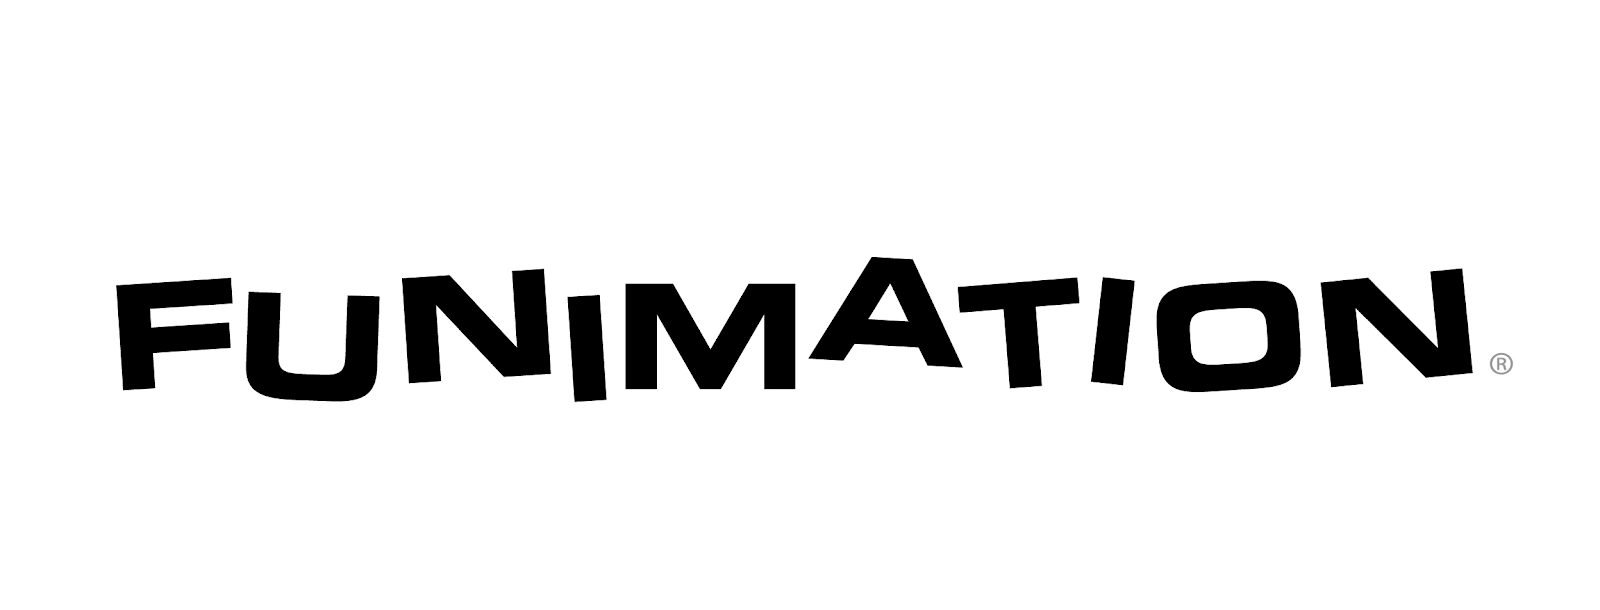 File:FunimationLogo.png - Wikimedia Commons